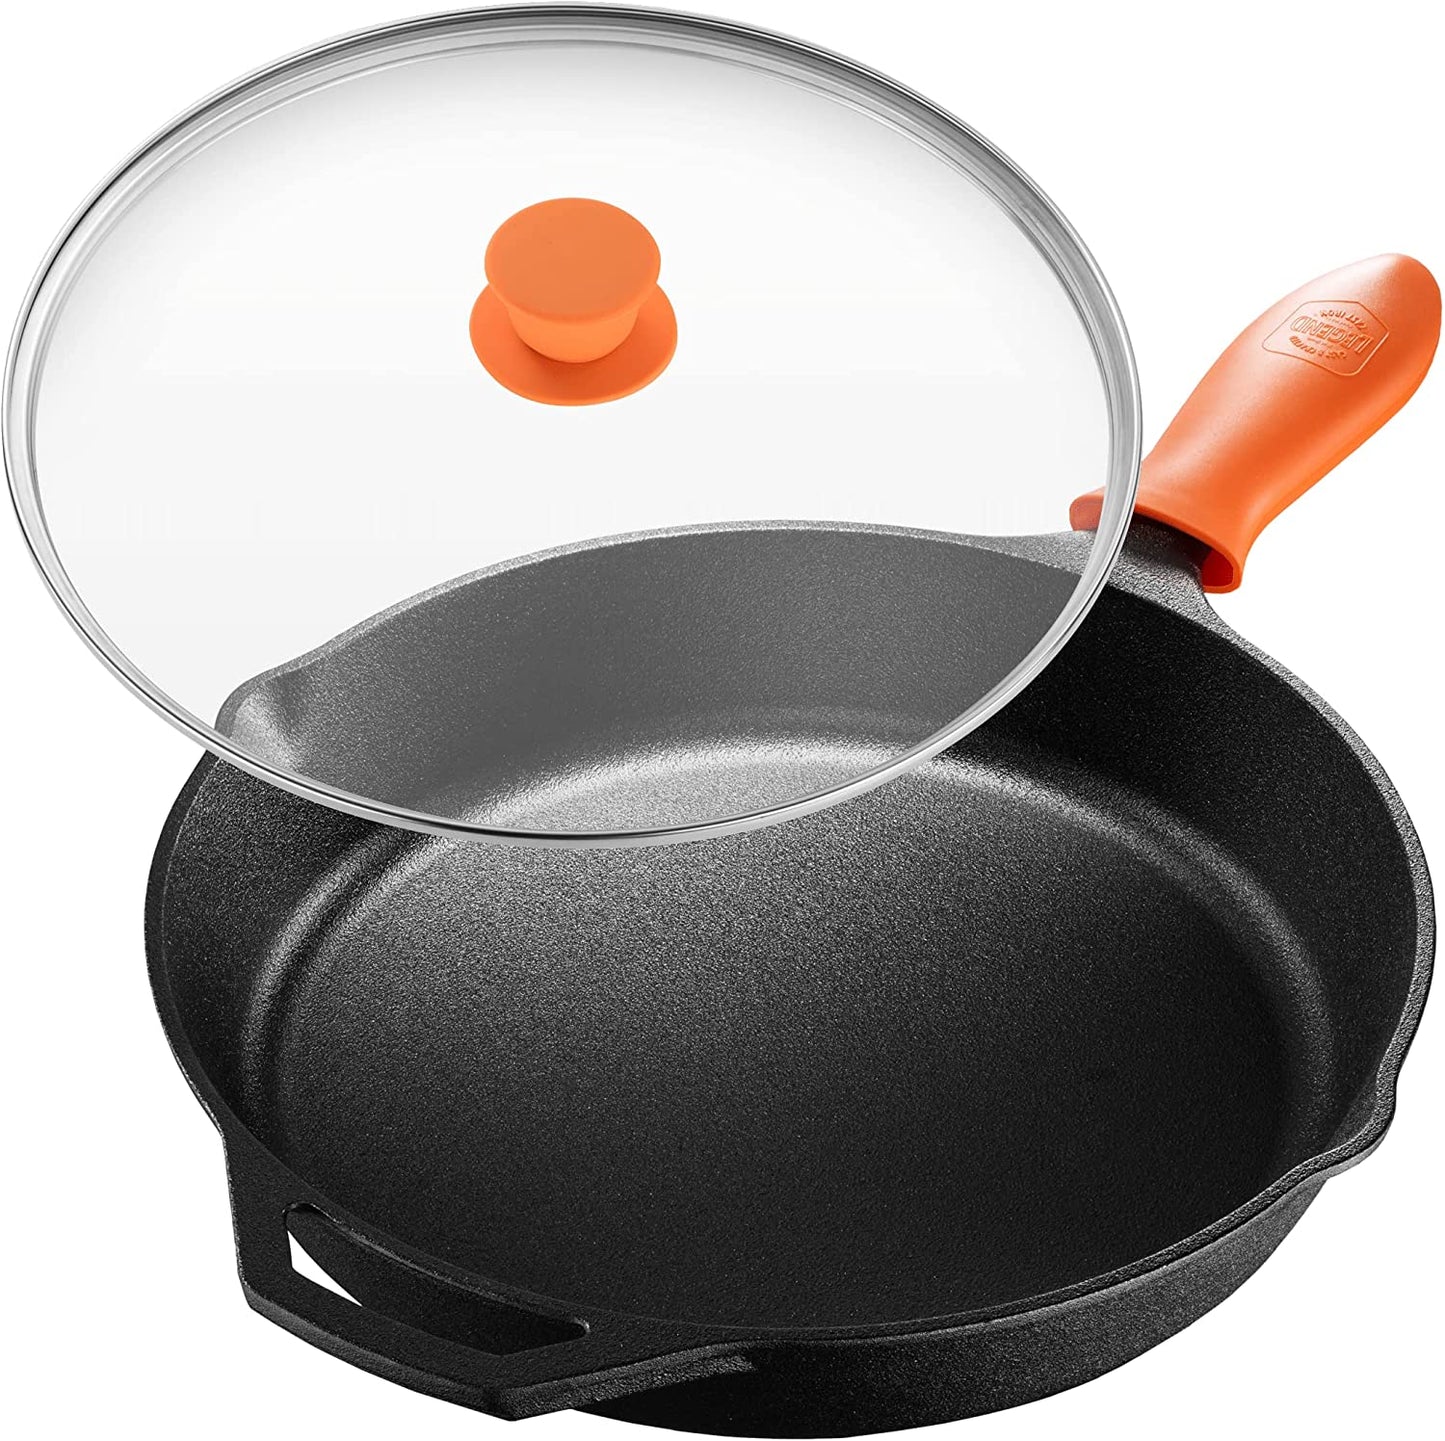  LEGEND COOKWARE, Cast Iron Skillet with Lid